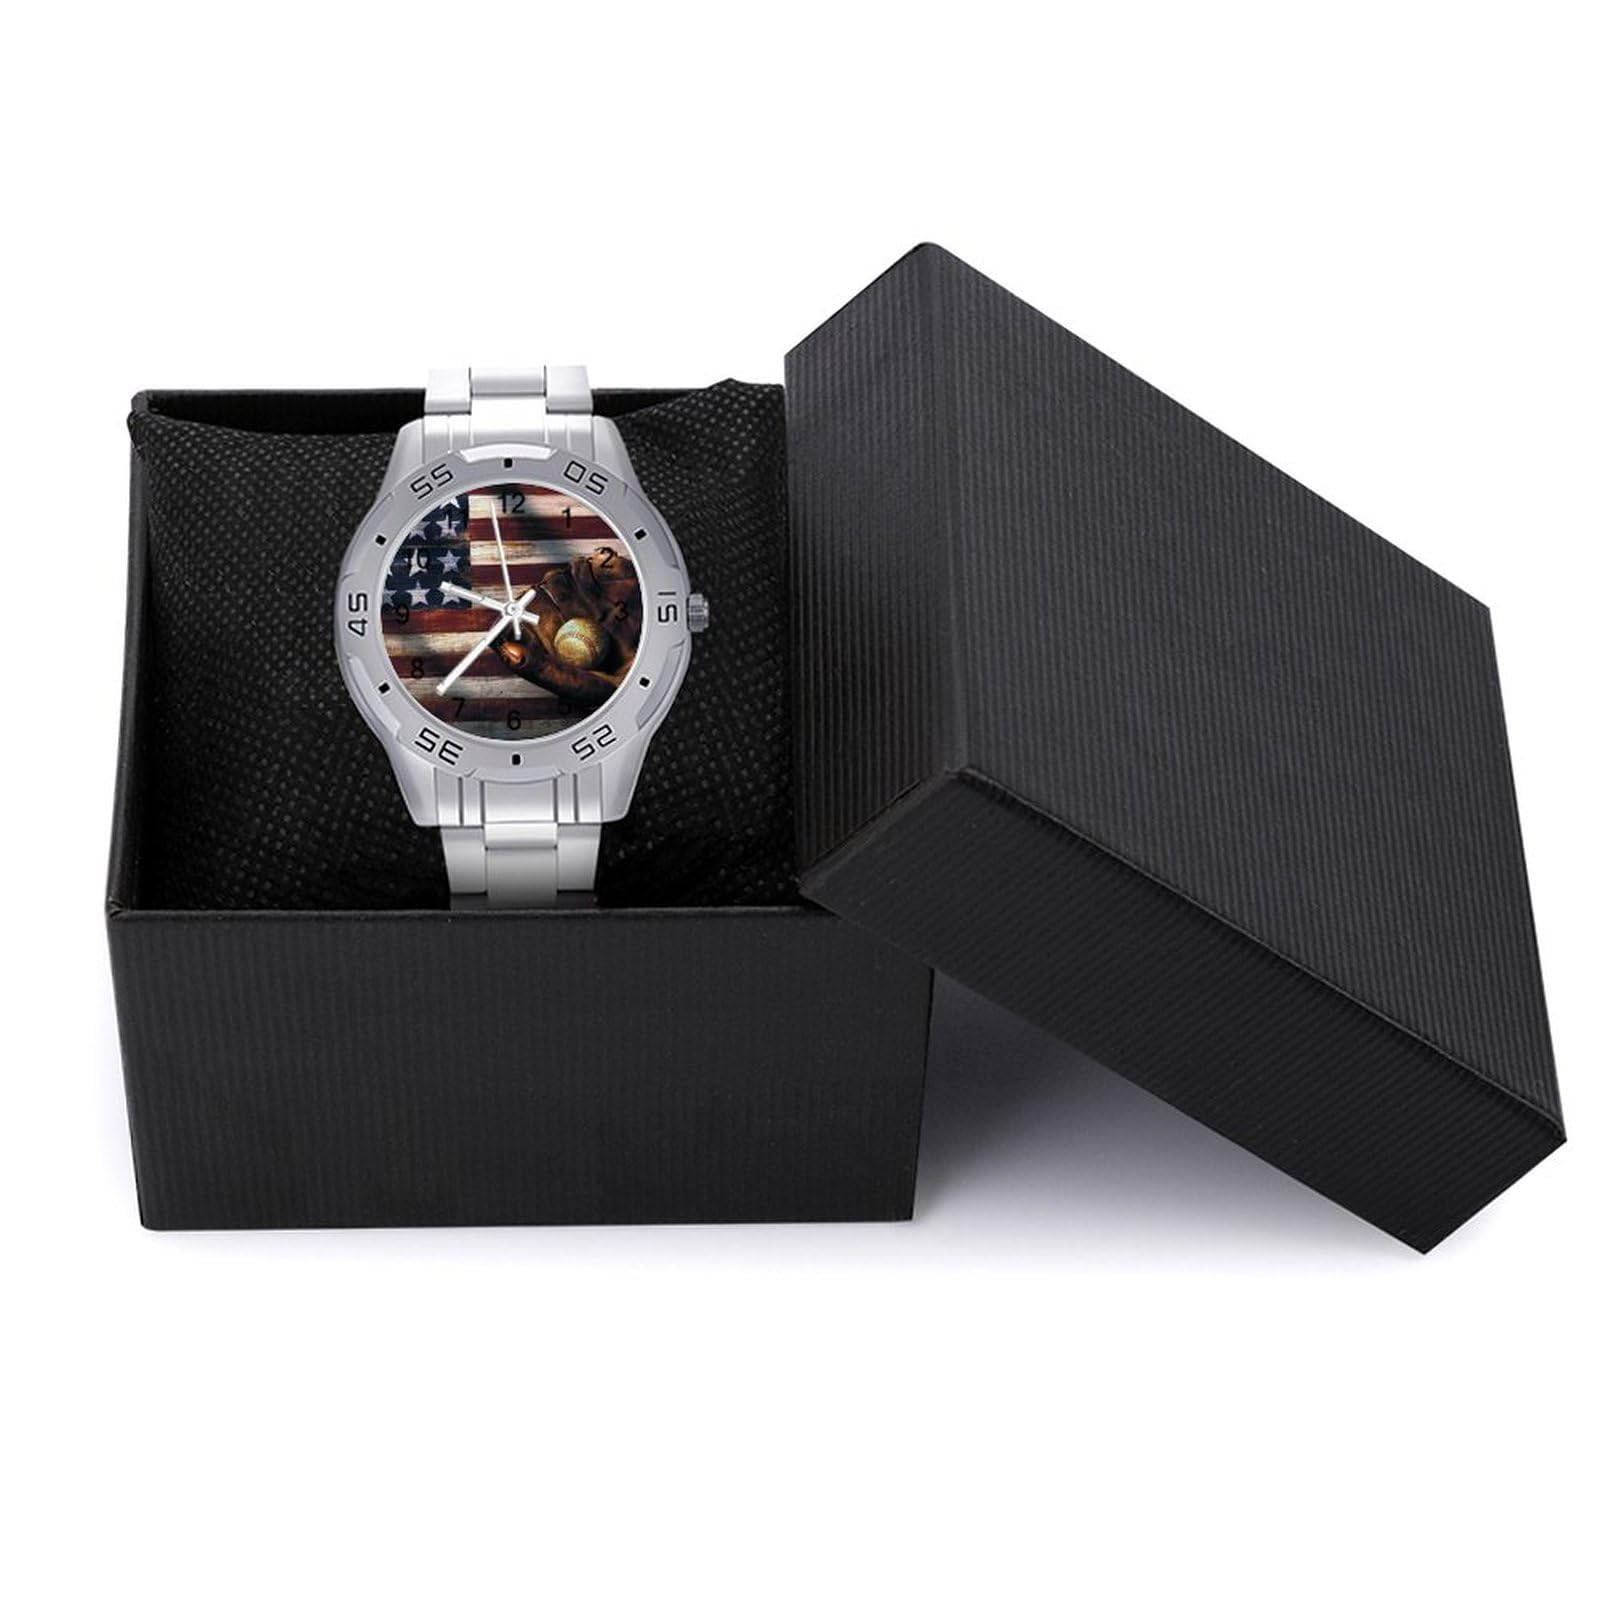 American Baseball Flag Stainless Steel Band Business Watch Dress Wrist Unique Luxury Work Casual Waterproof Watches